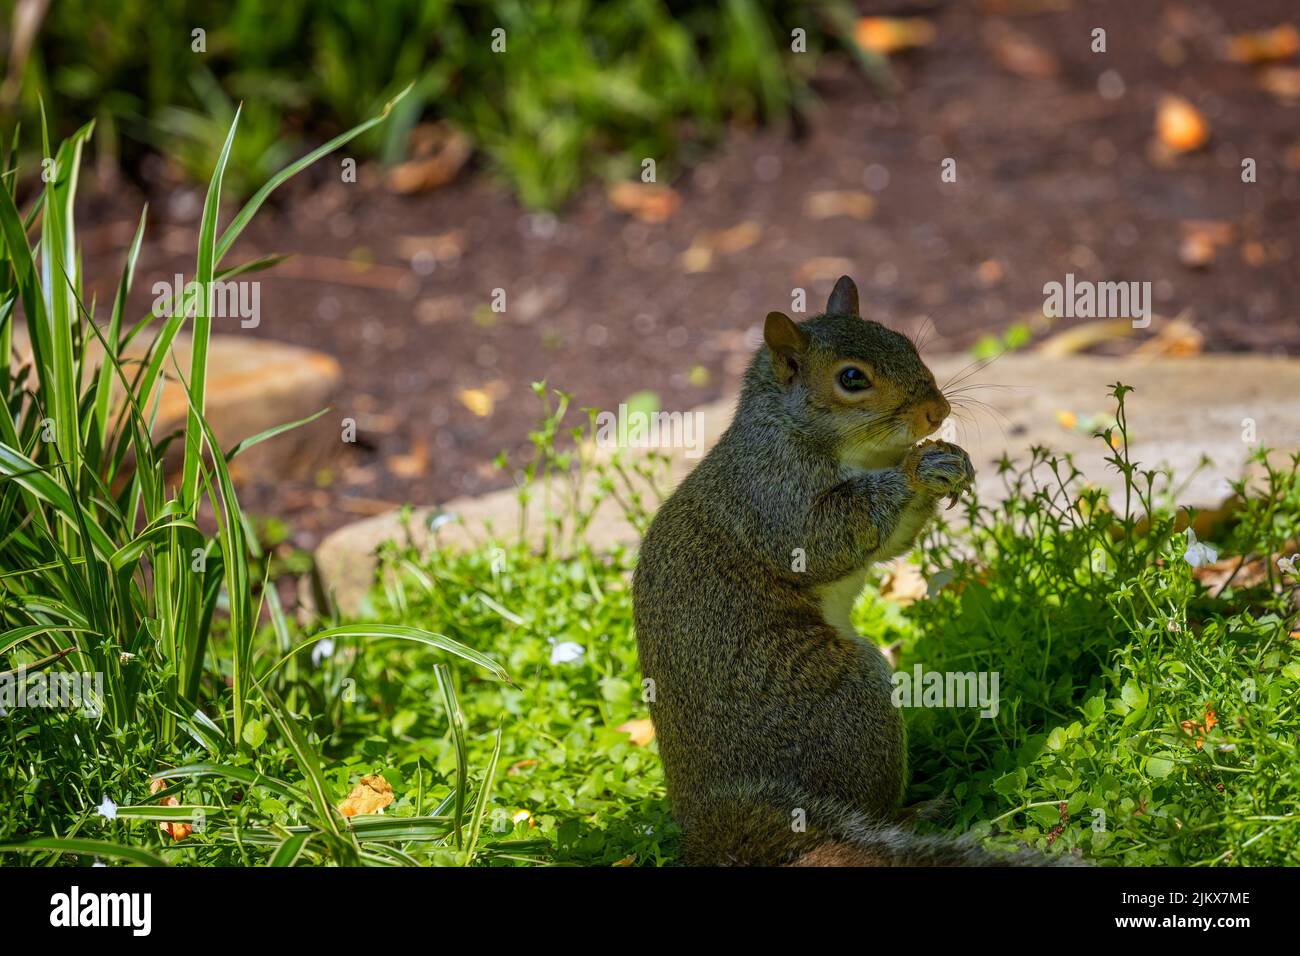 A gray squirrel sits on haunches eating in a garden. Stock Photo